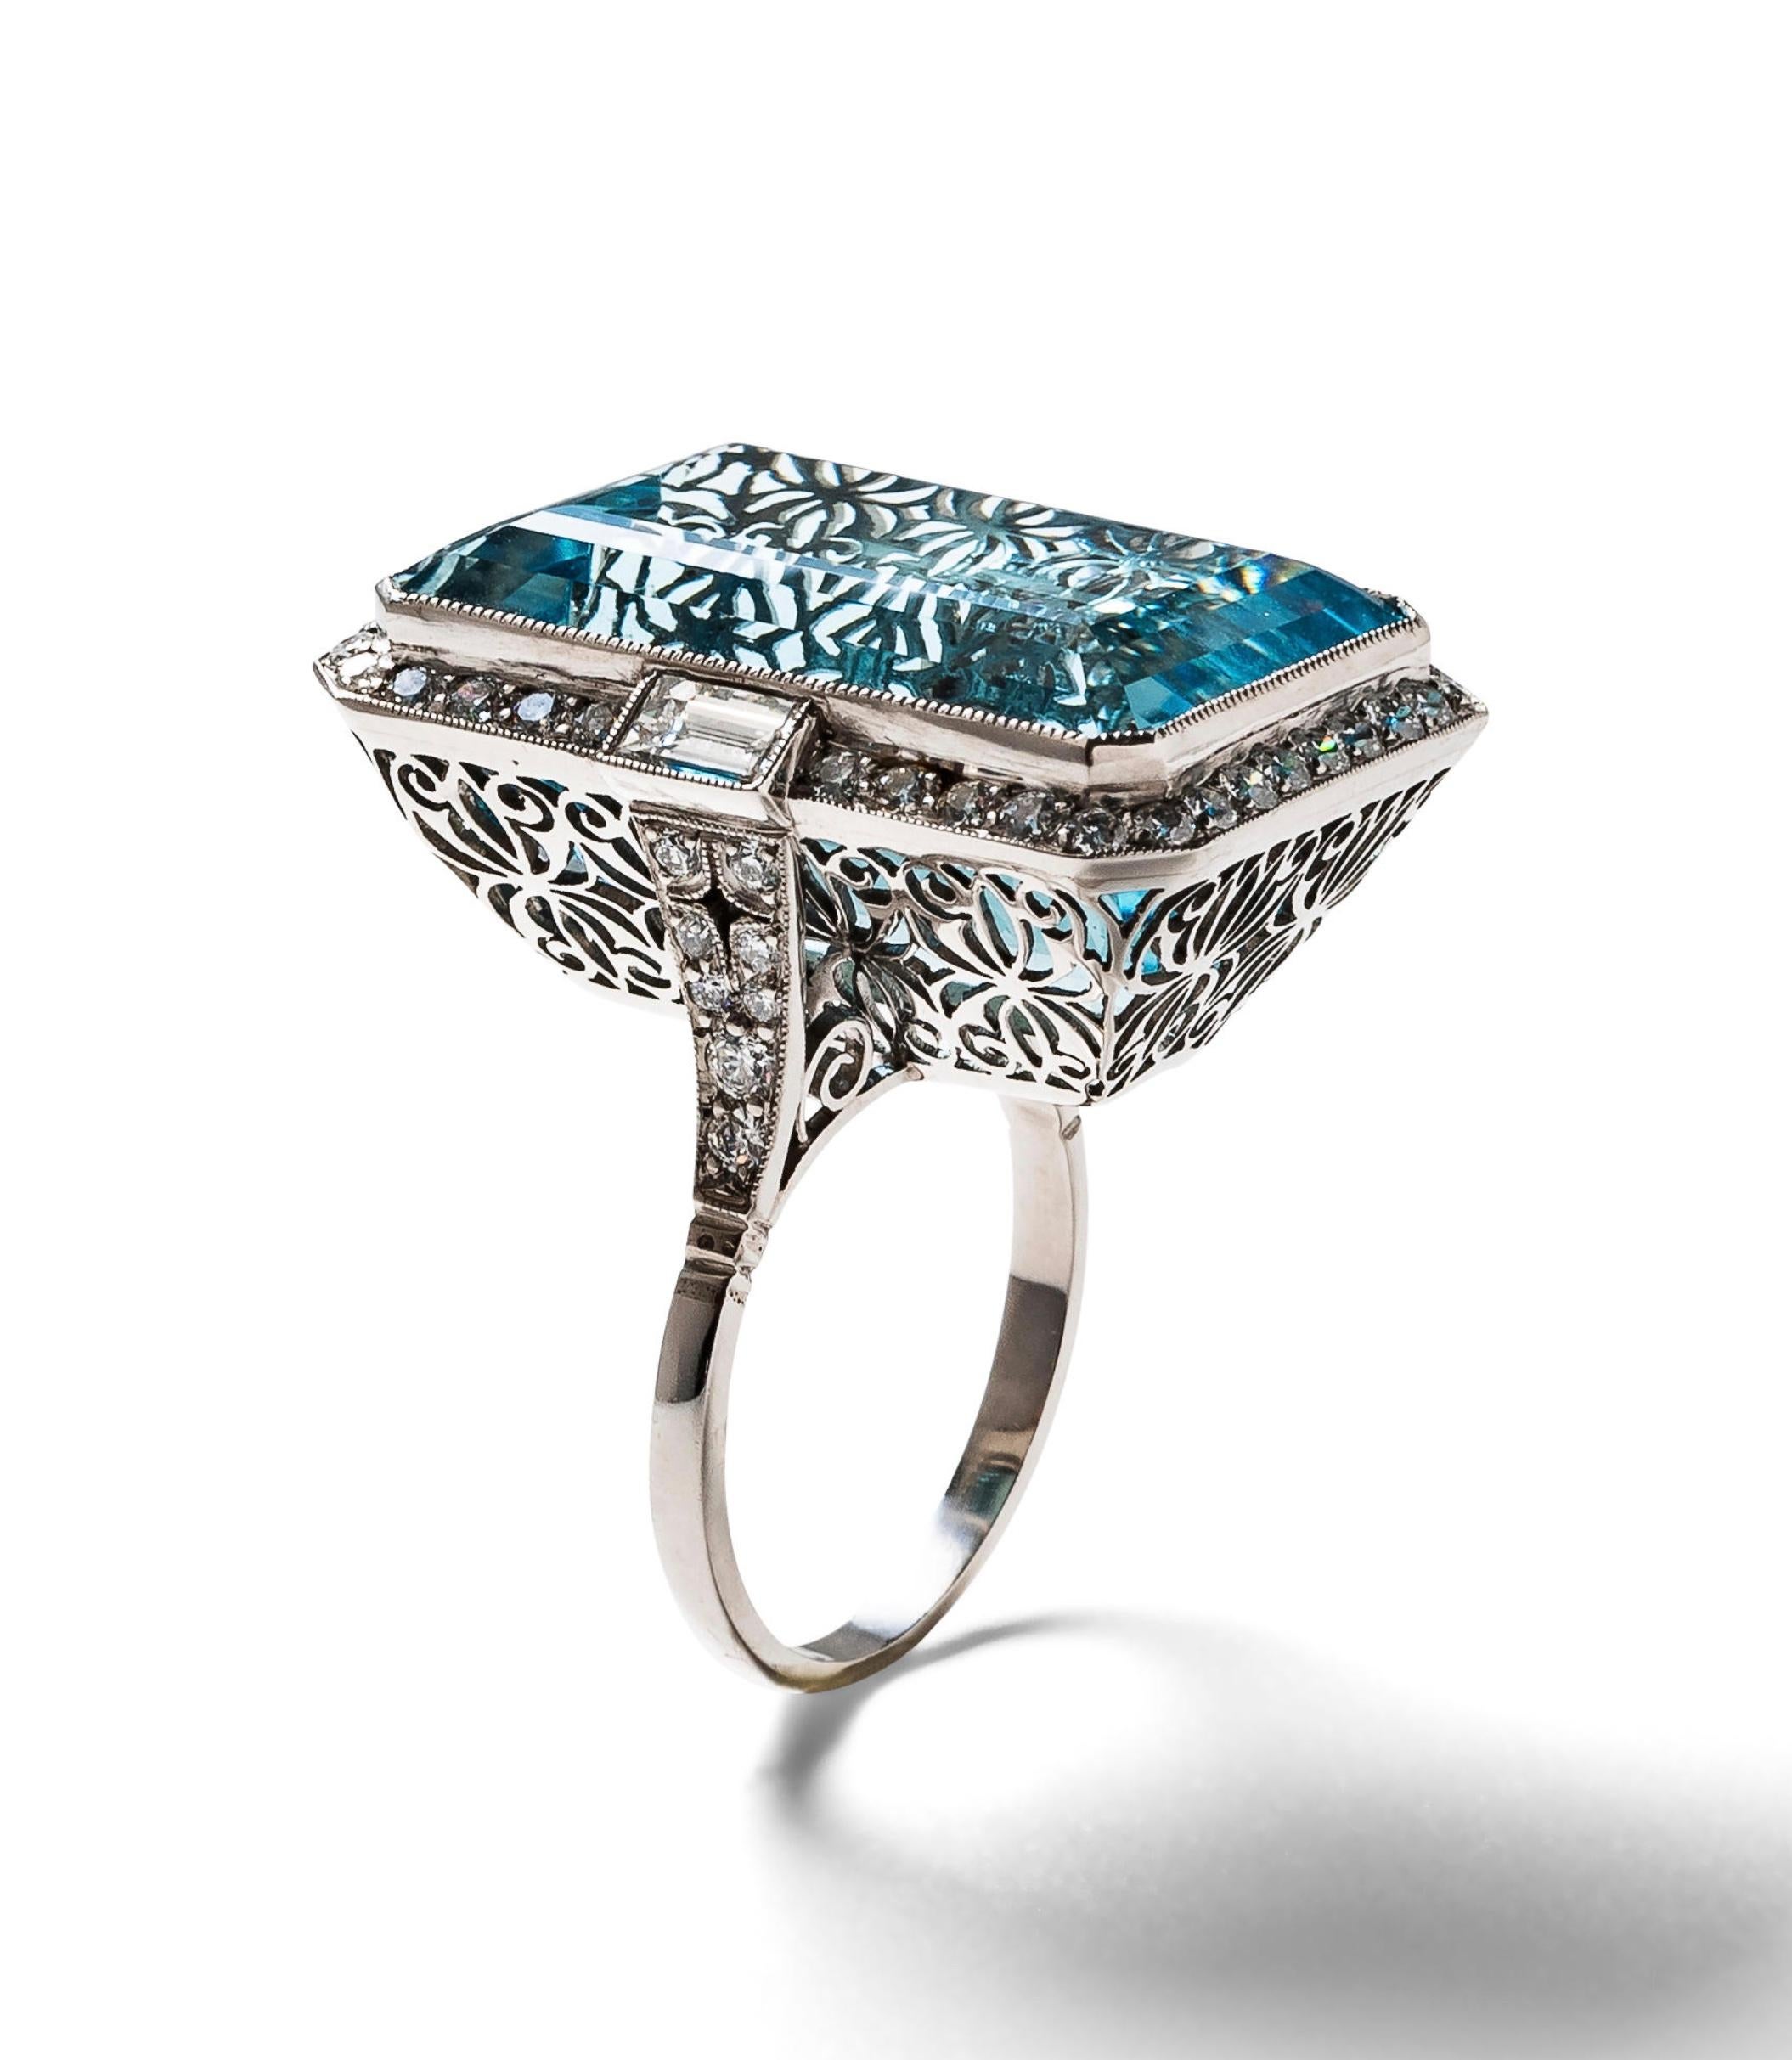 Aquamarine and diamond ring 

Bezel-set with a large rectangular emerald-cut aquamarine (24 x 15.5 x 12.10 mm) of approximately 30 carats, framed by baguette and full-cut diamonds of approximately 1.5 carat; platinum

Size: 7 US
Total weight: 16.3